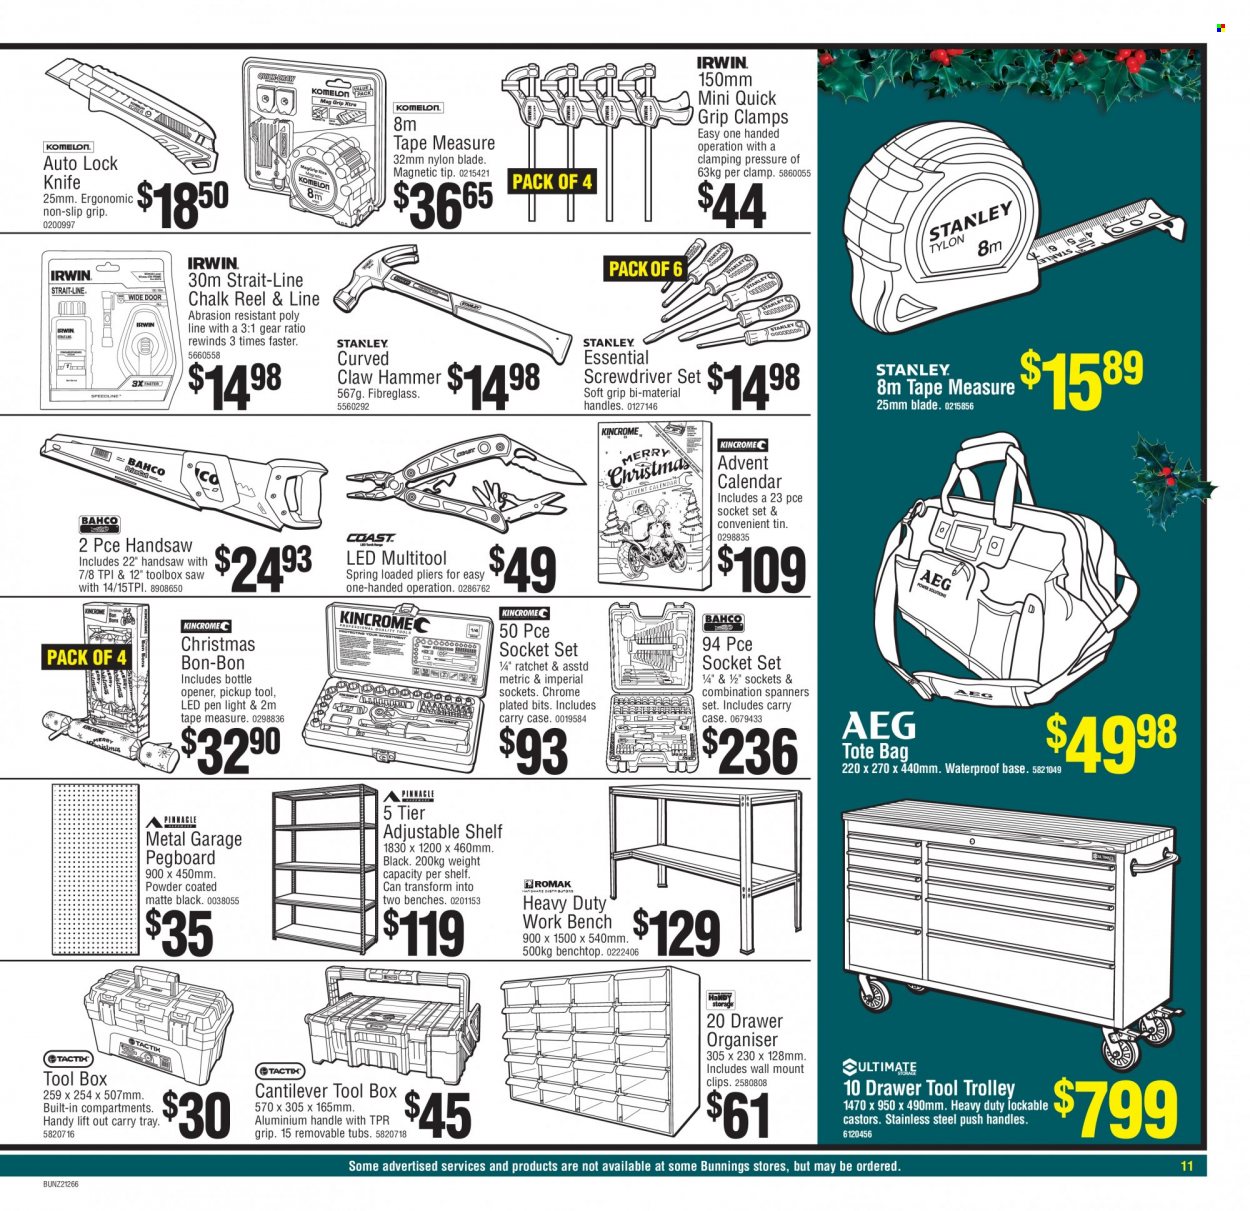 Bunnings Warehouse mailer  - 29.12.2021 - 29.12.2021. Page 11.